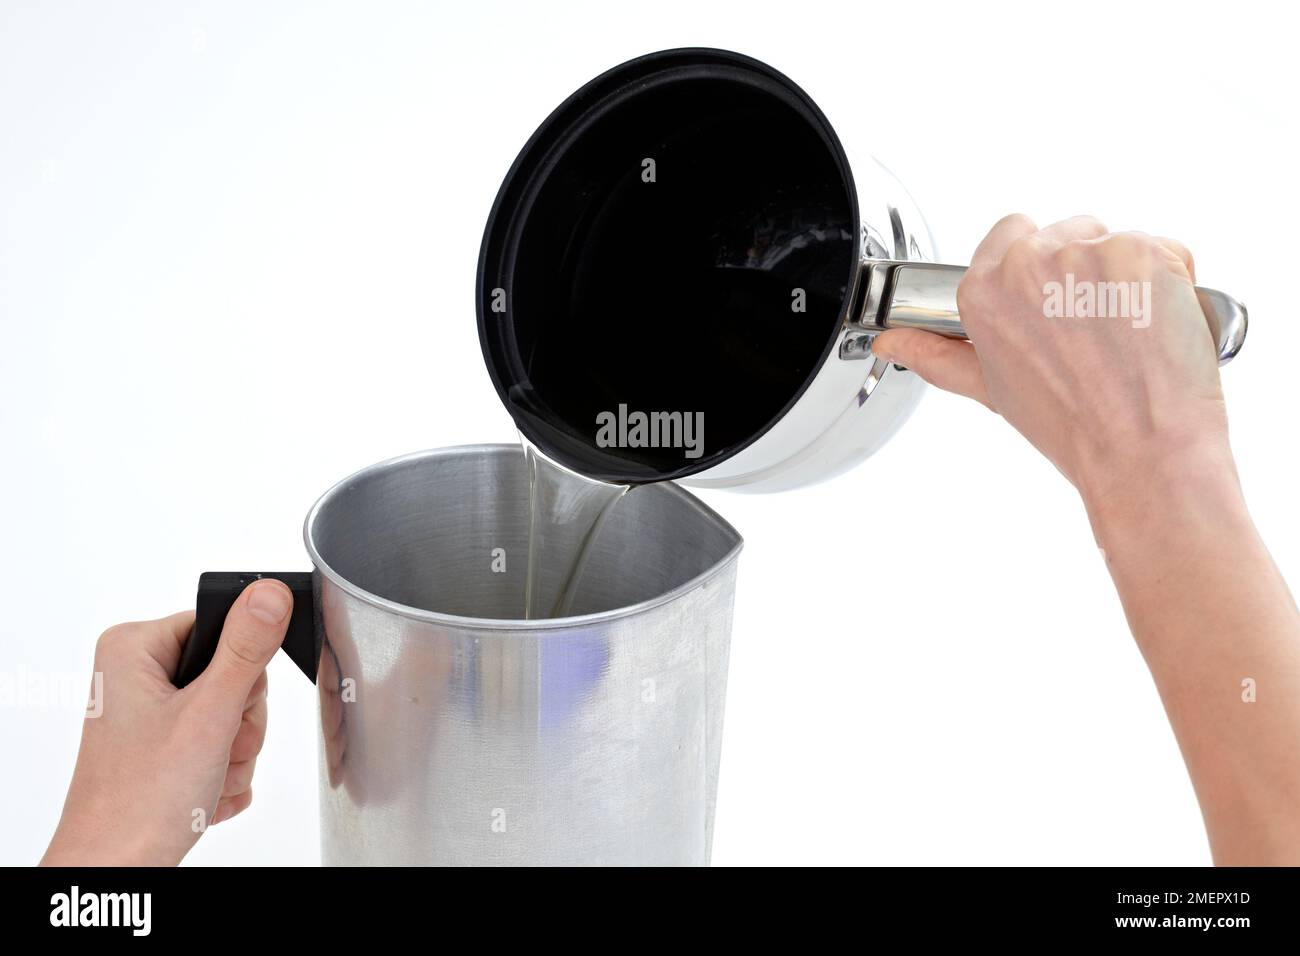 Pouring melted soy wax from double-boiler into metal jug to make three-layer candle, close-up Stock Photo